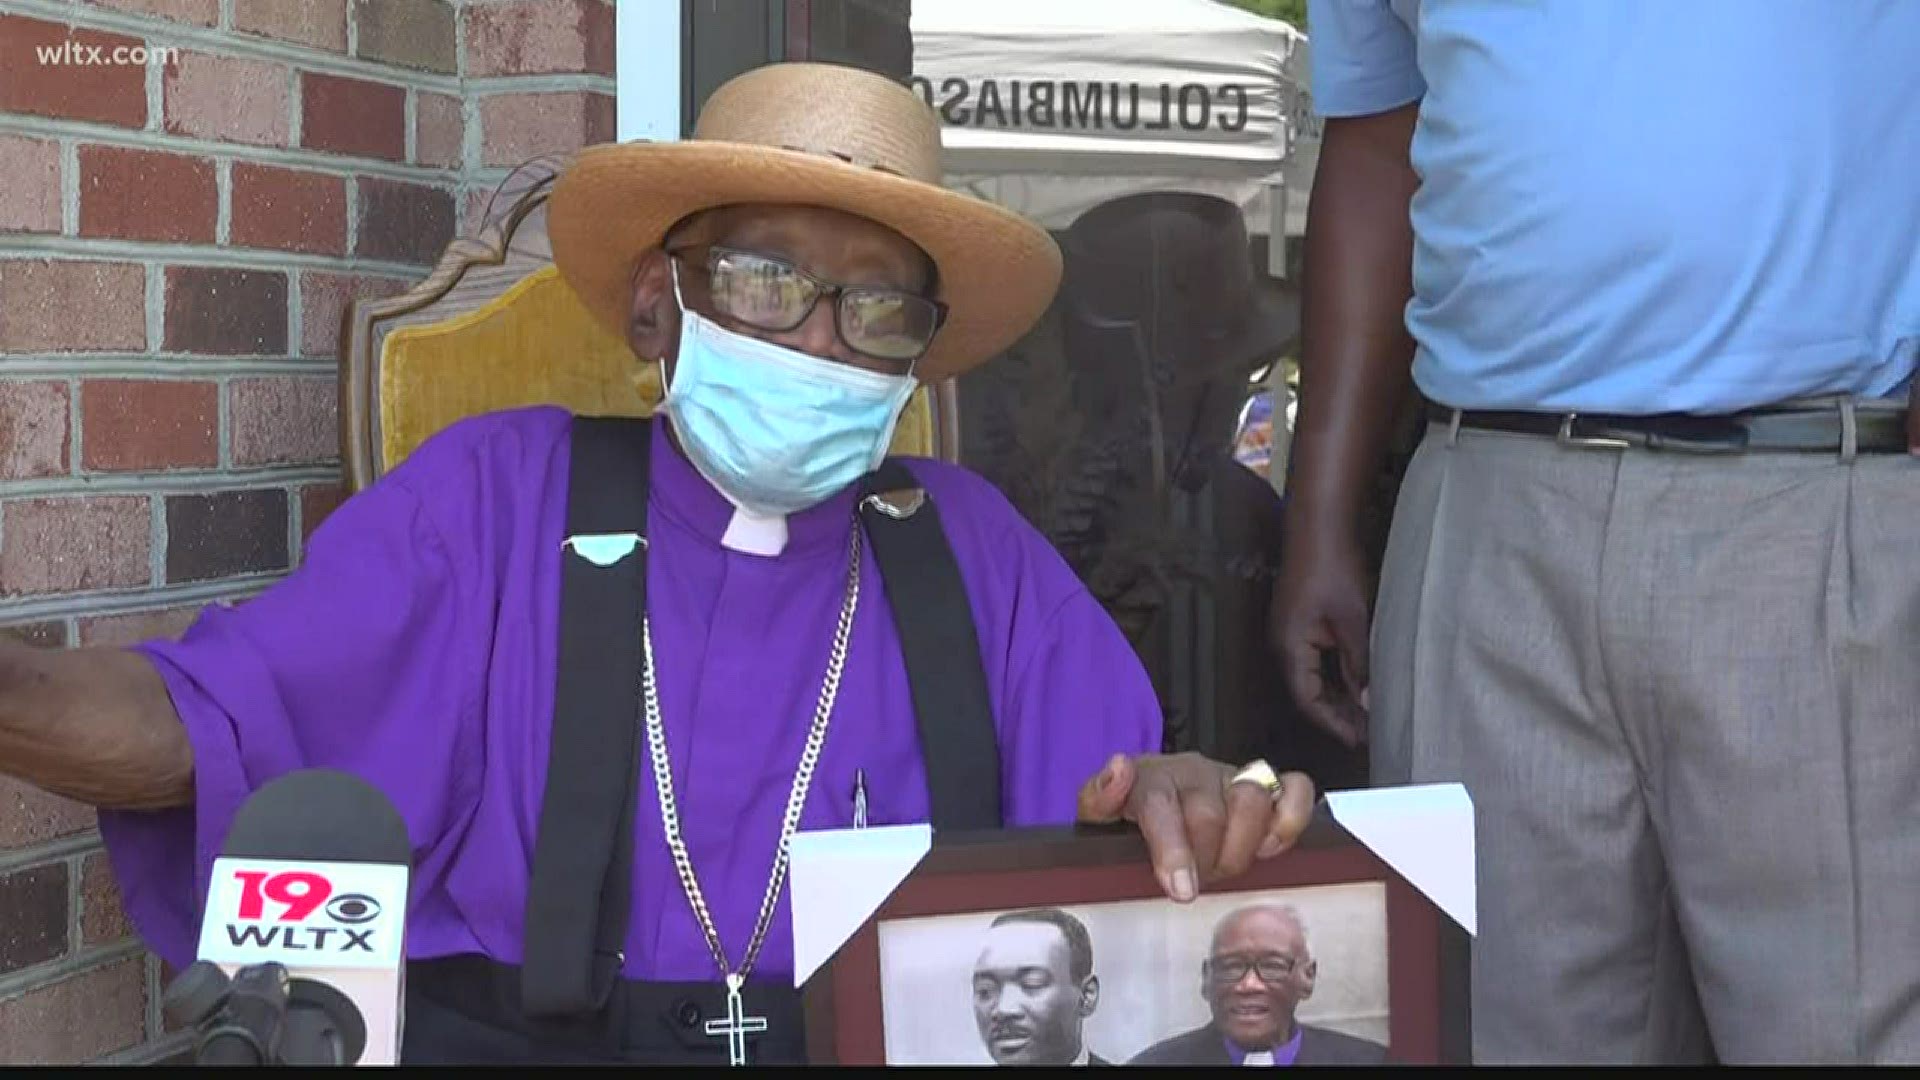 Bishop Frederick James was honored today for his work on civil rights.